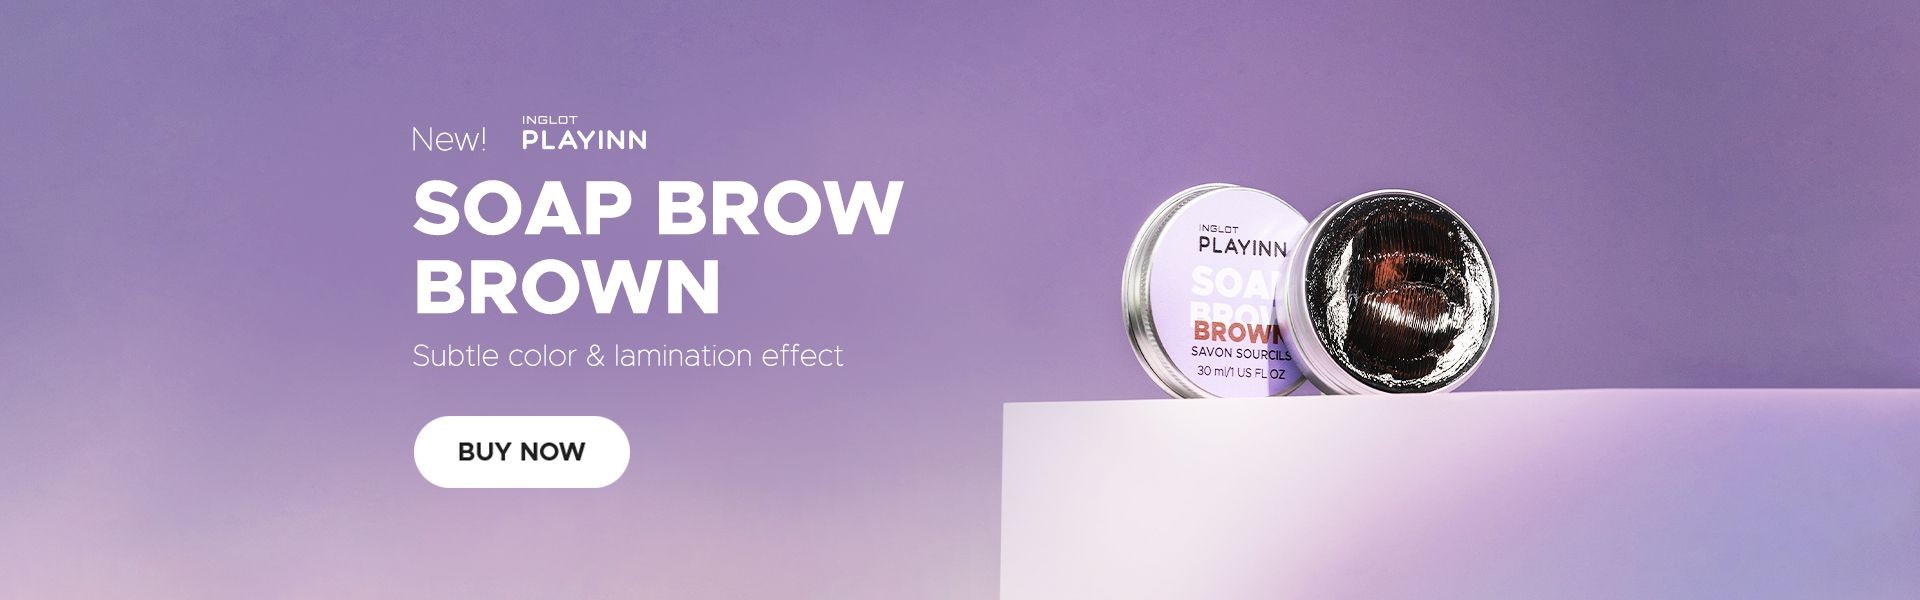 soap brow brown